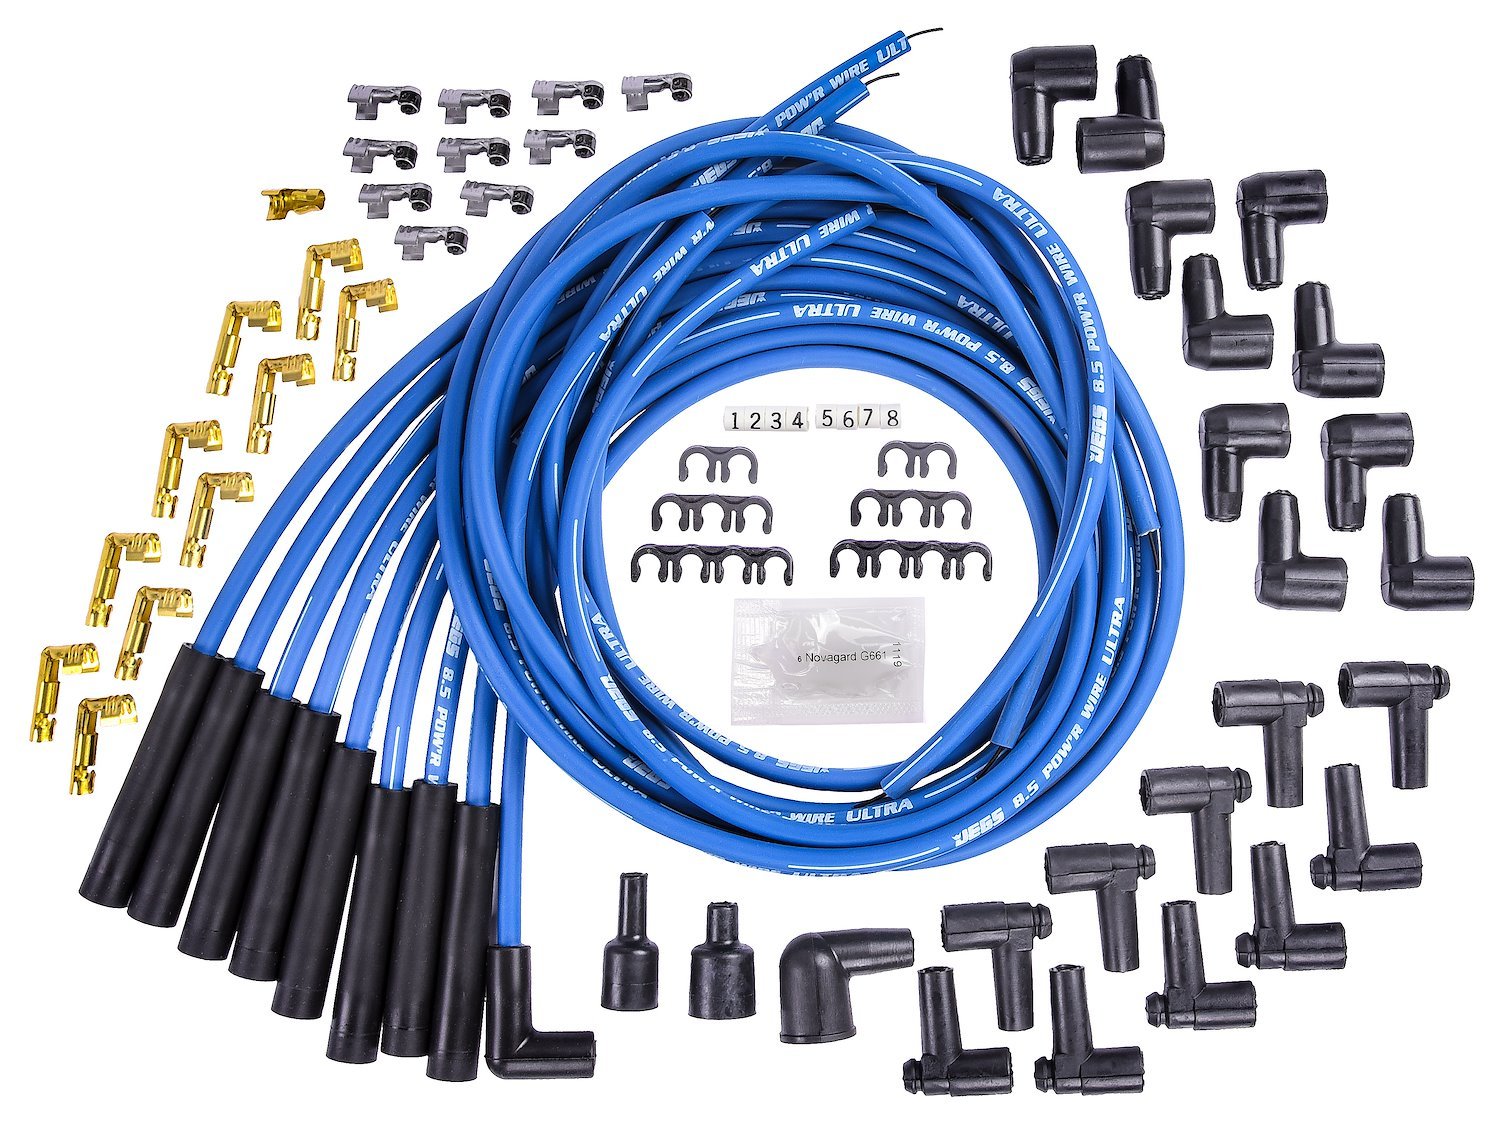 8.5mm Blue Ultra Power Wires for Small and Big Block Chevy Over Valve Covers or Under Headers and AMC 290-401 V8 w/ HEI